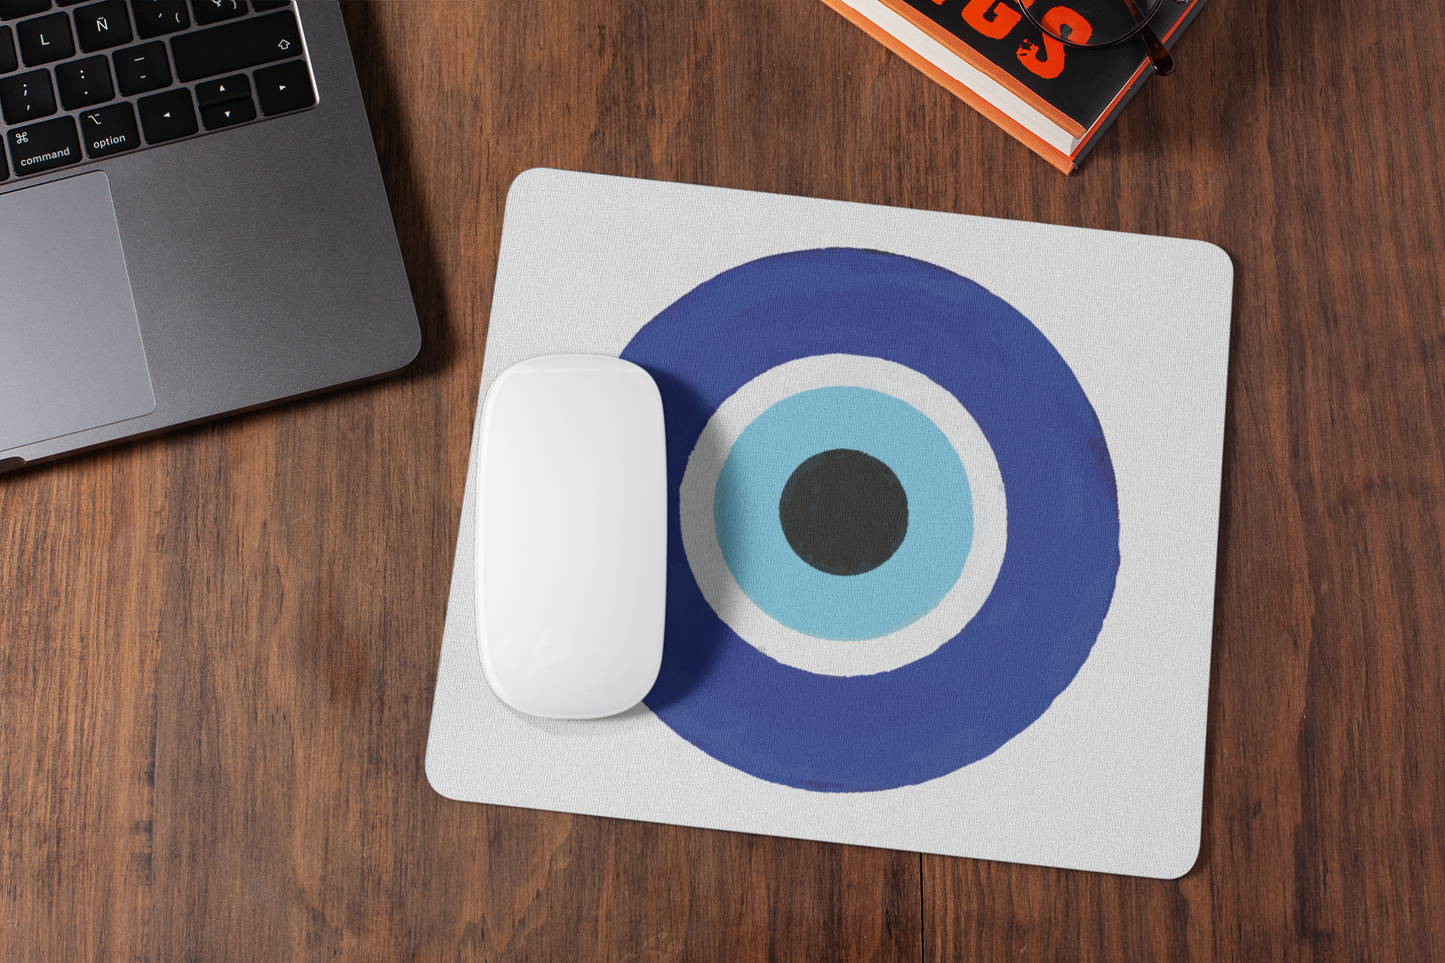 Evils eye mousepad for laptop and desktop with Rubber Base - Anti Skid